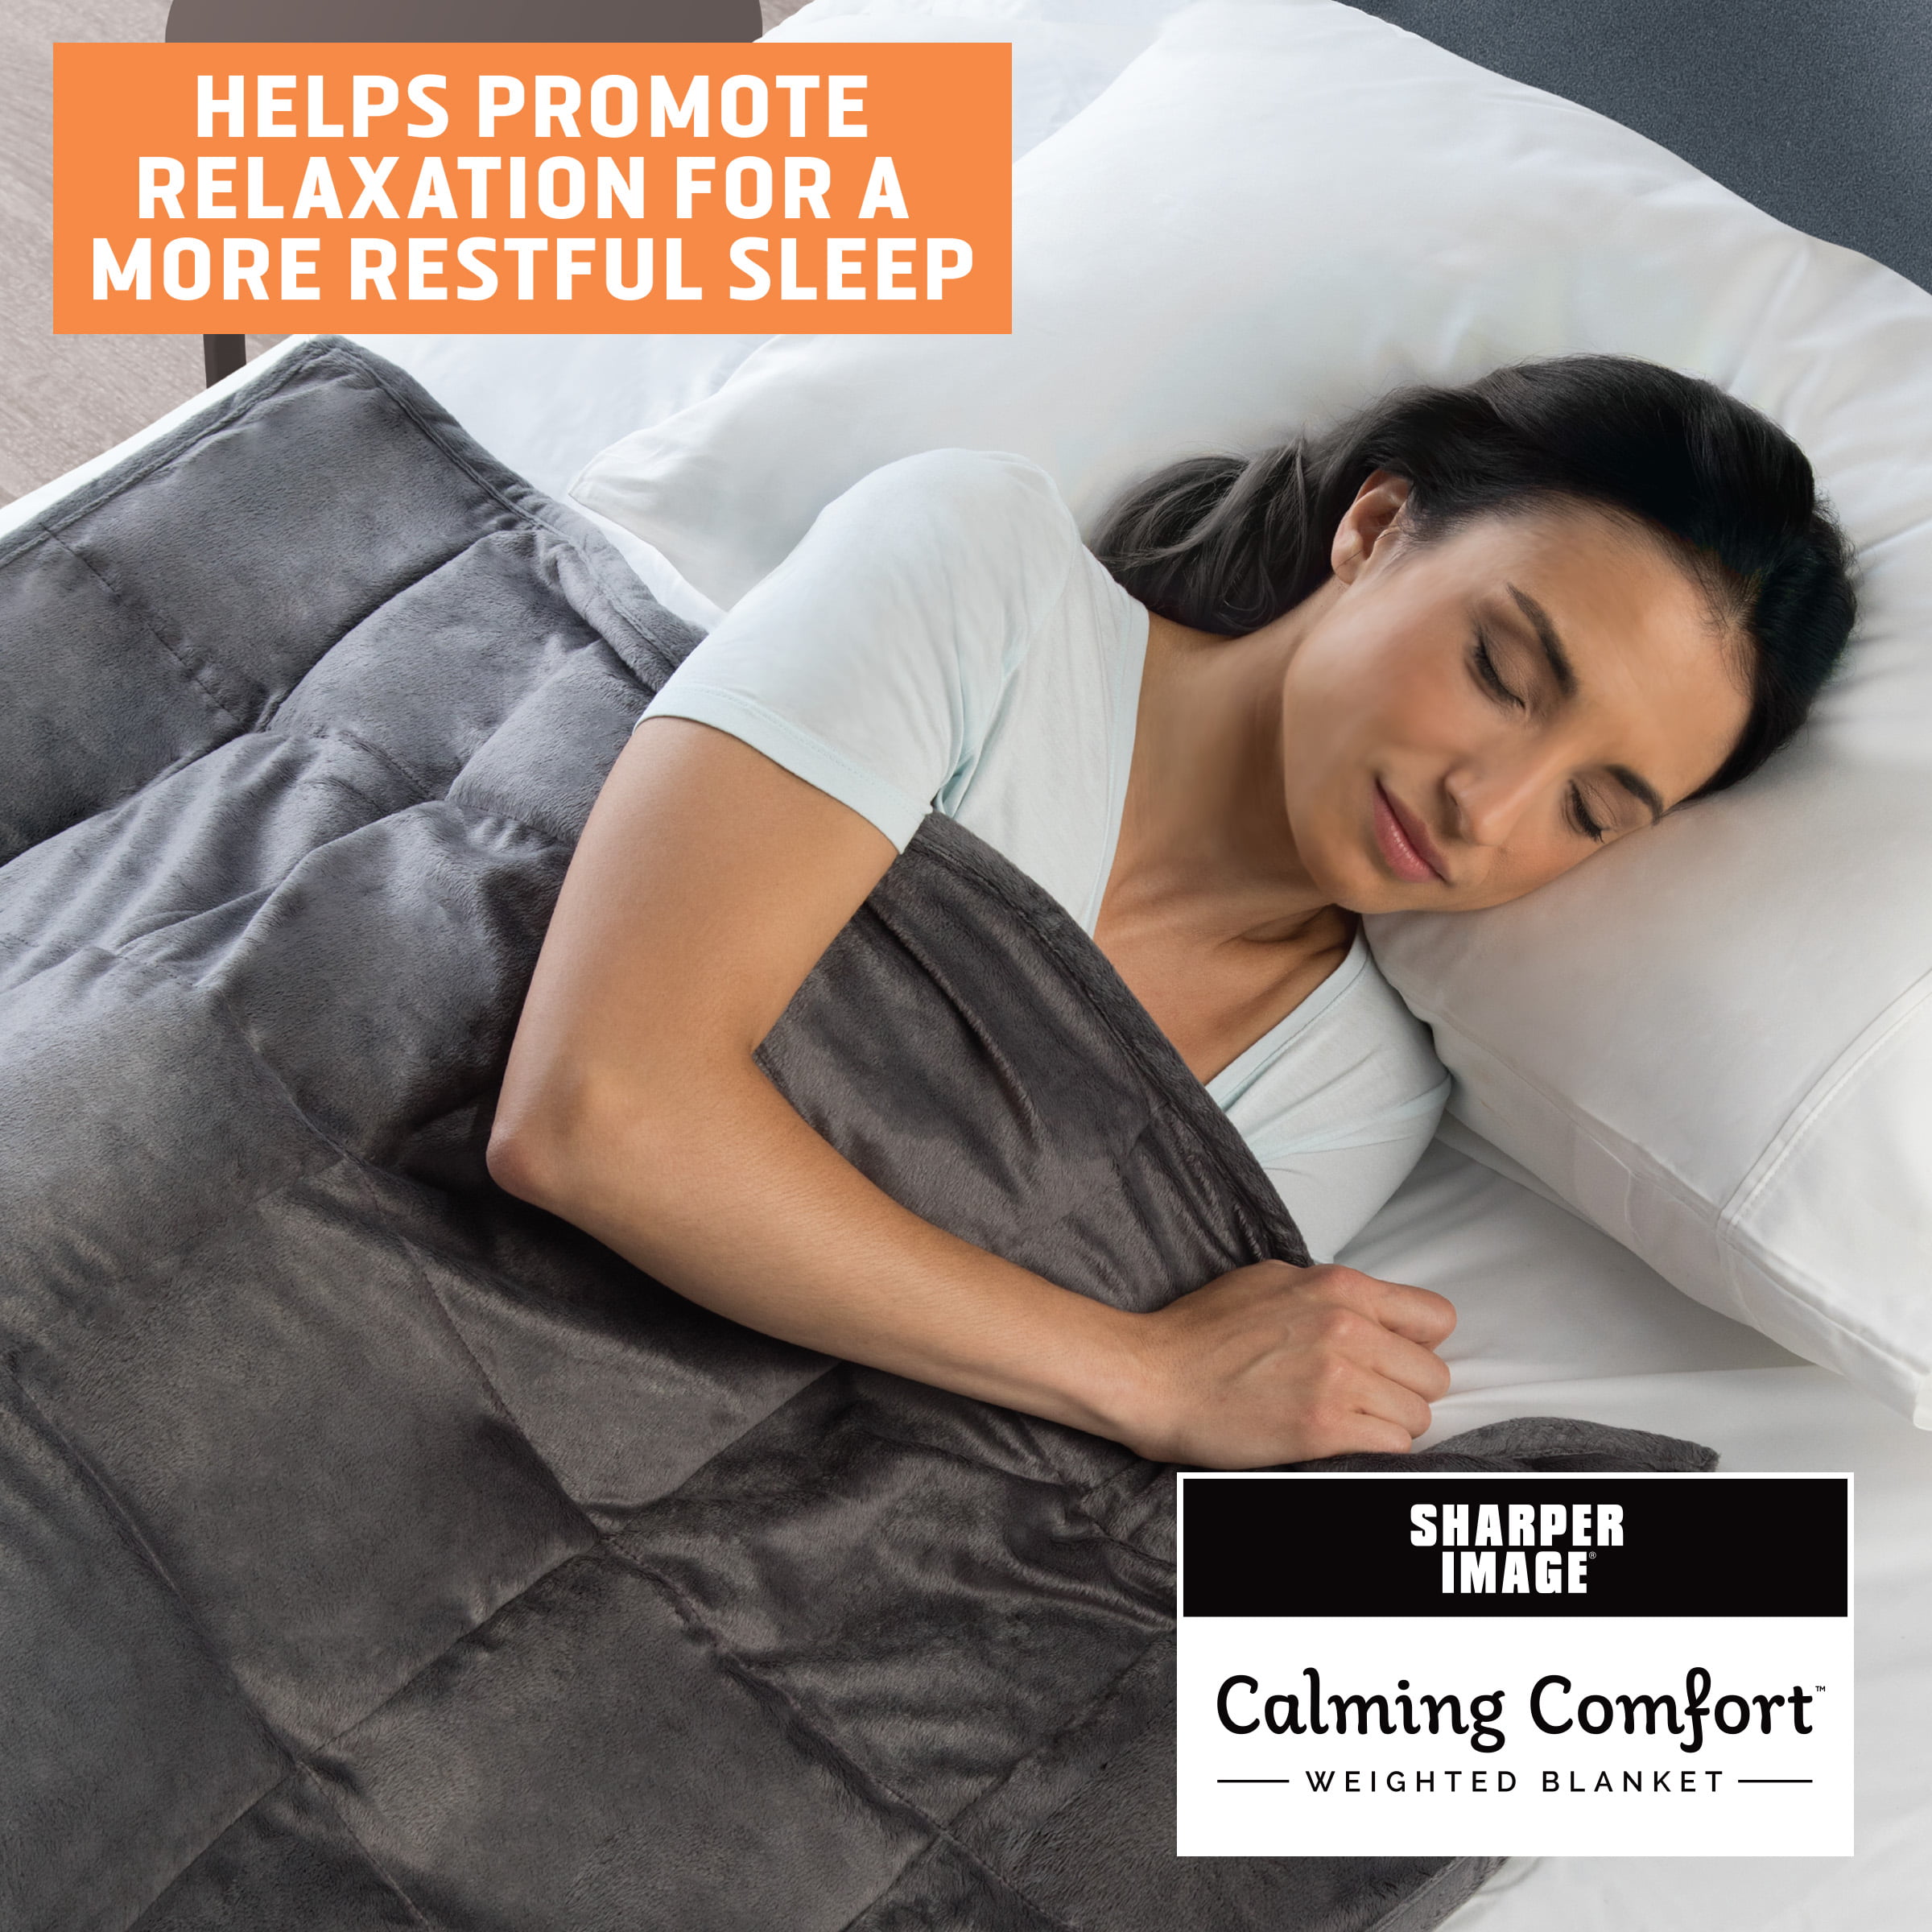 Calming Comfort Weighted Blanket By The Sharper Image